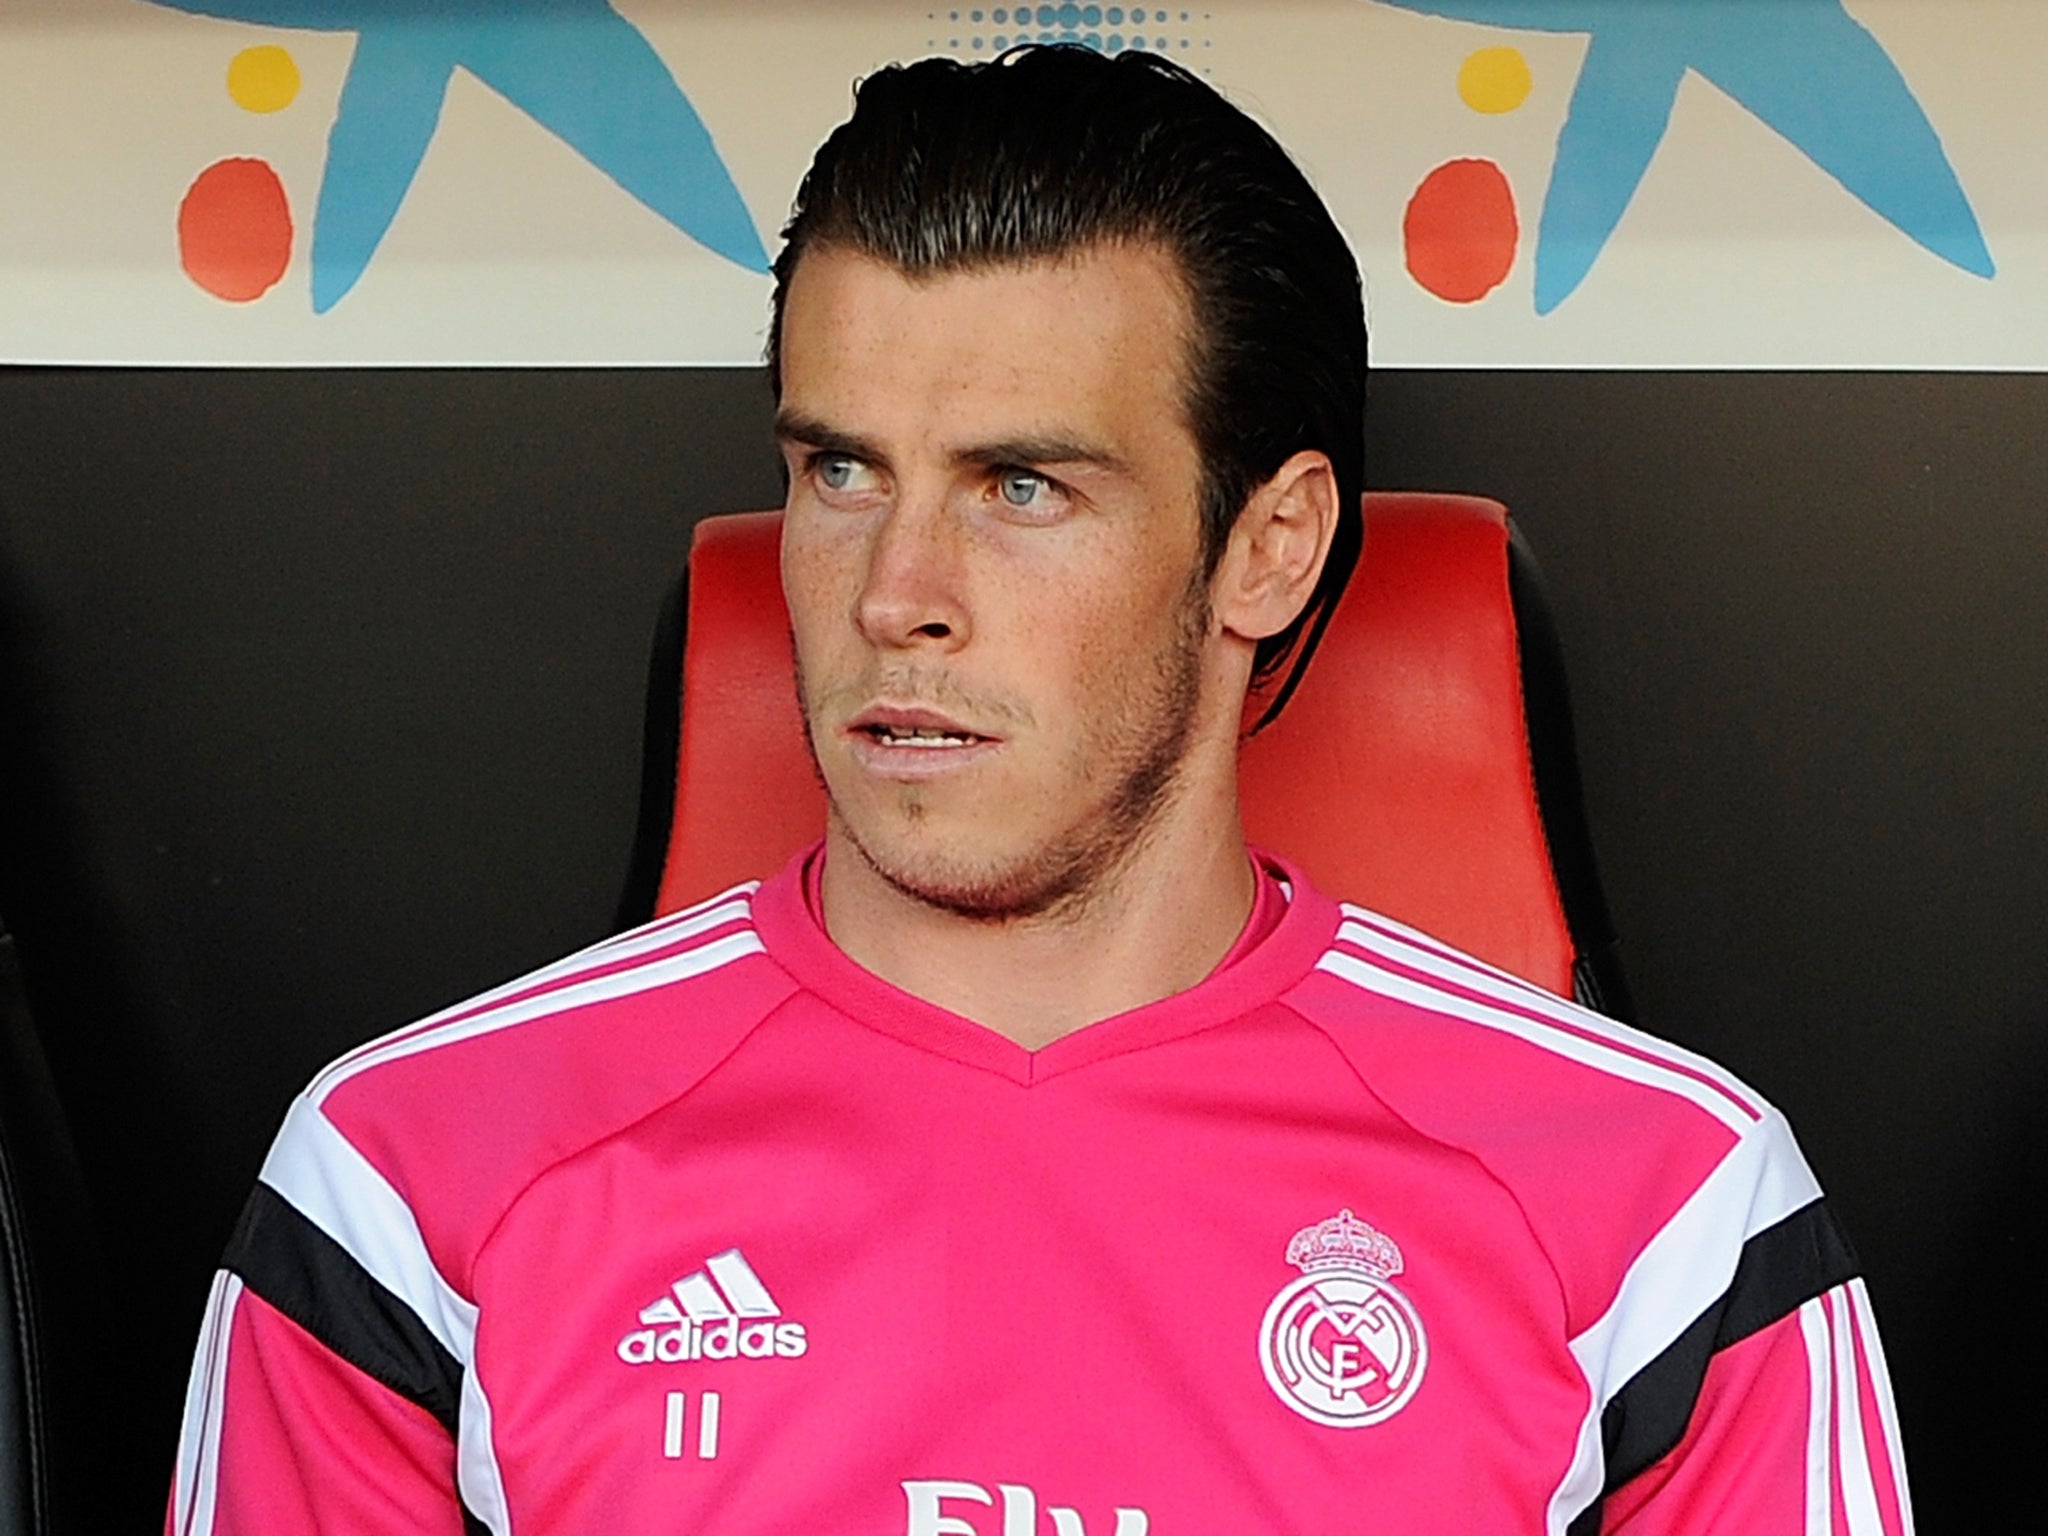 Gareth Bale's agent claimed his Real Madrid team-mates did not pass to him enough